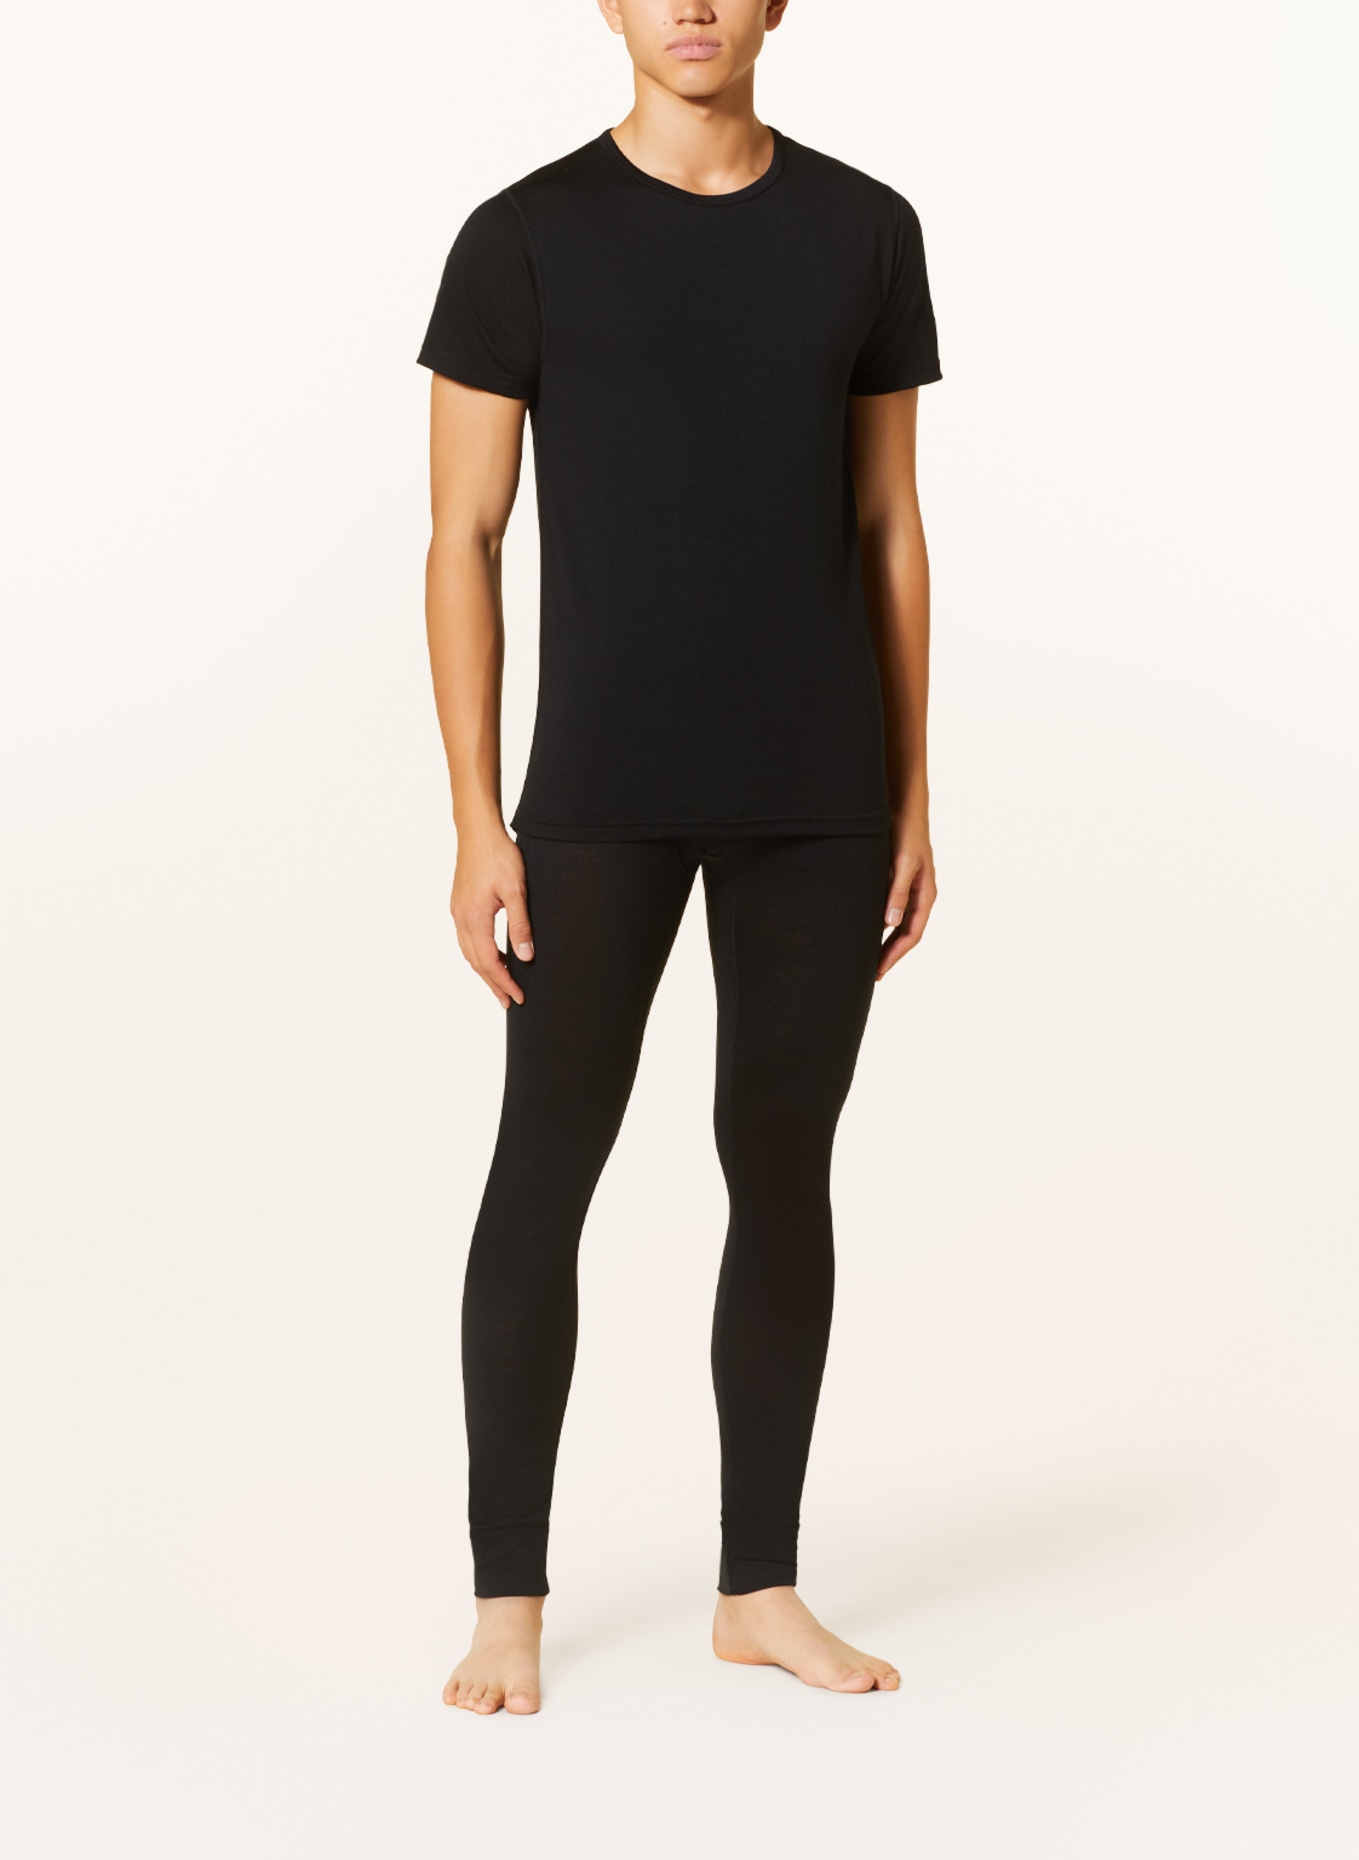 DEVOLD Functional underwear and baselayers BREEZE in merino wool, Color: BLACK (Image 2)